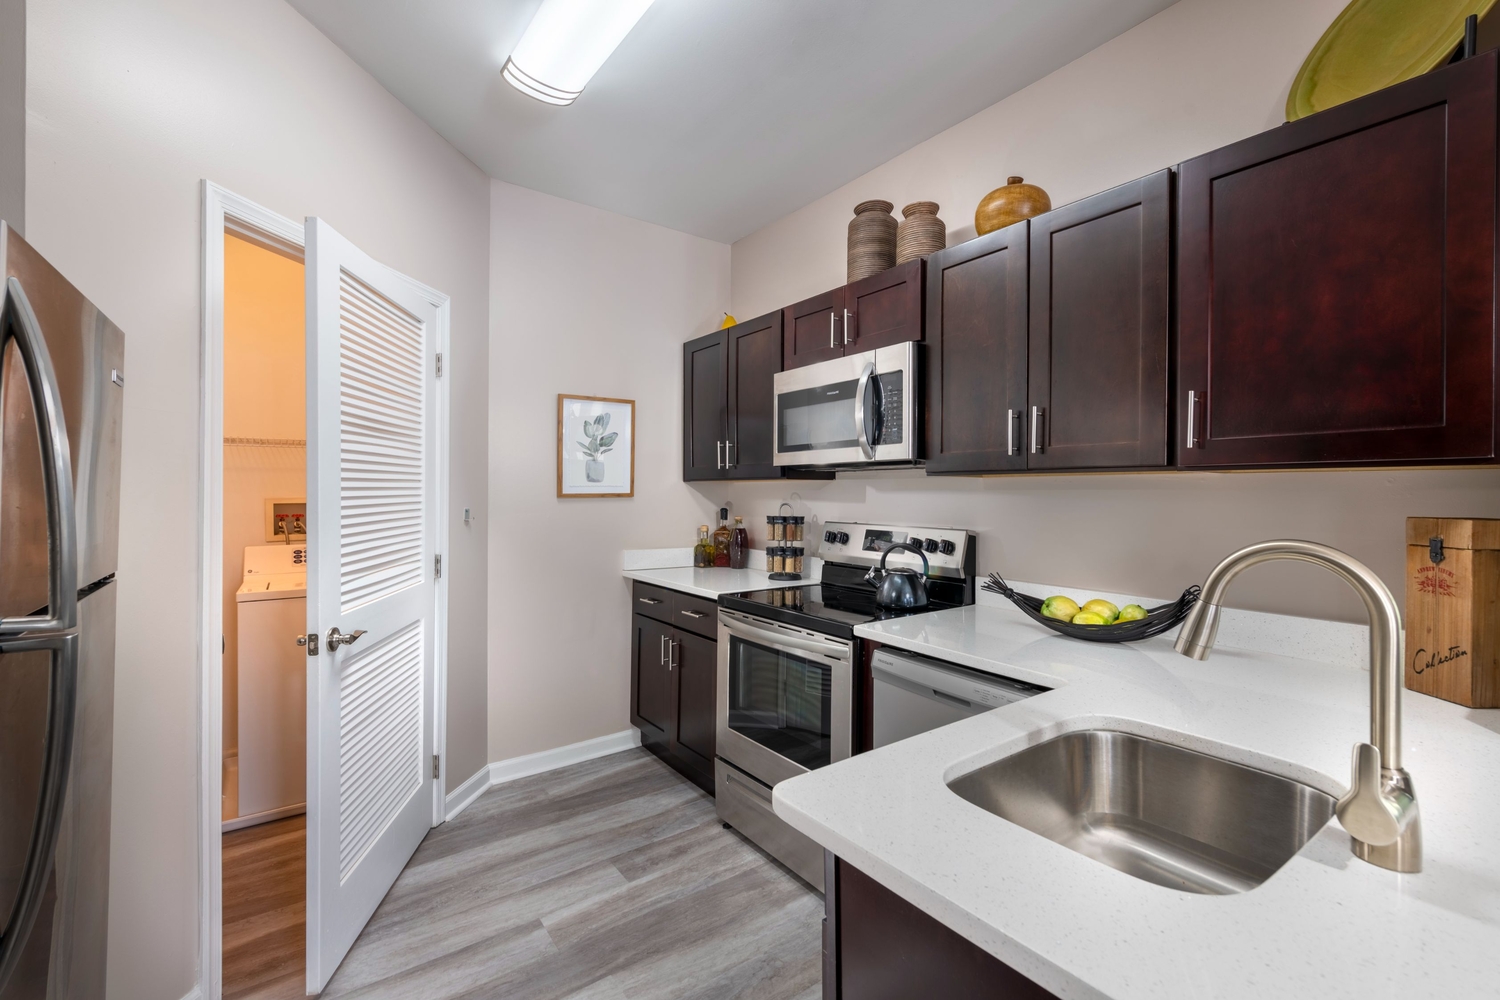 Sterling Parc at Hanover : Full kitchens with separate dining room space*